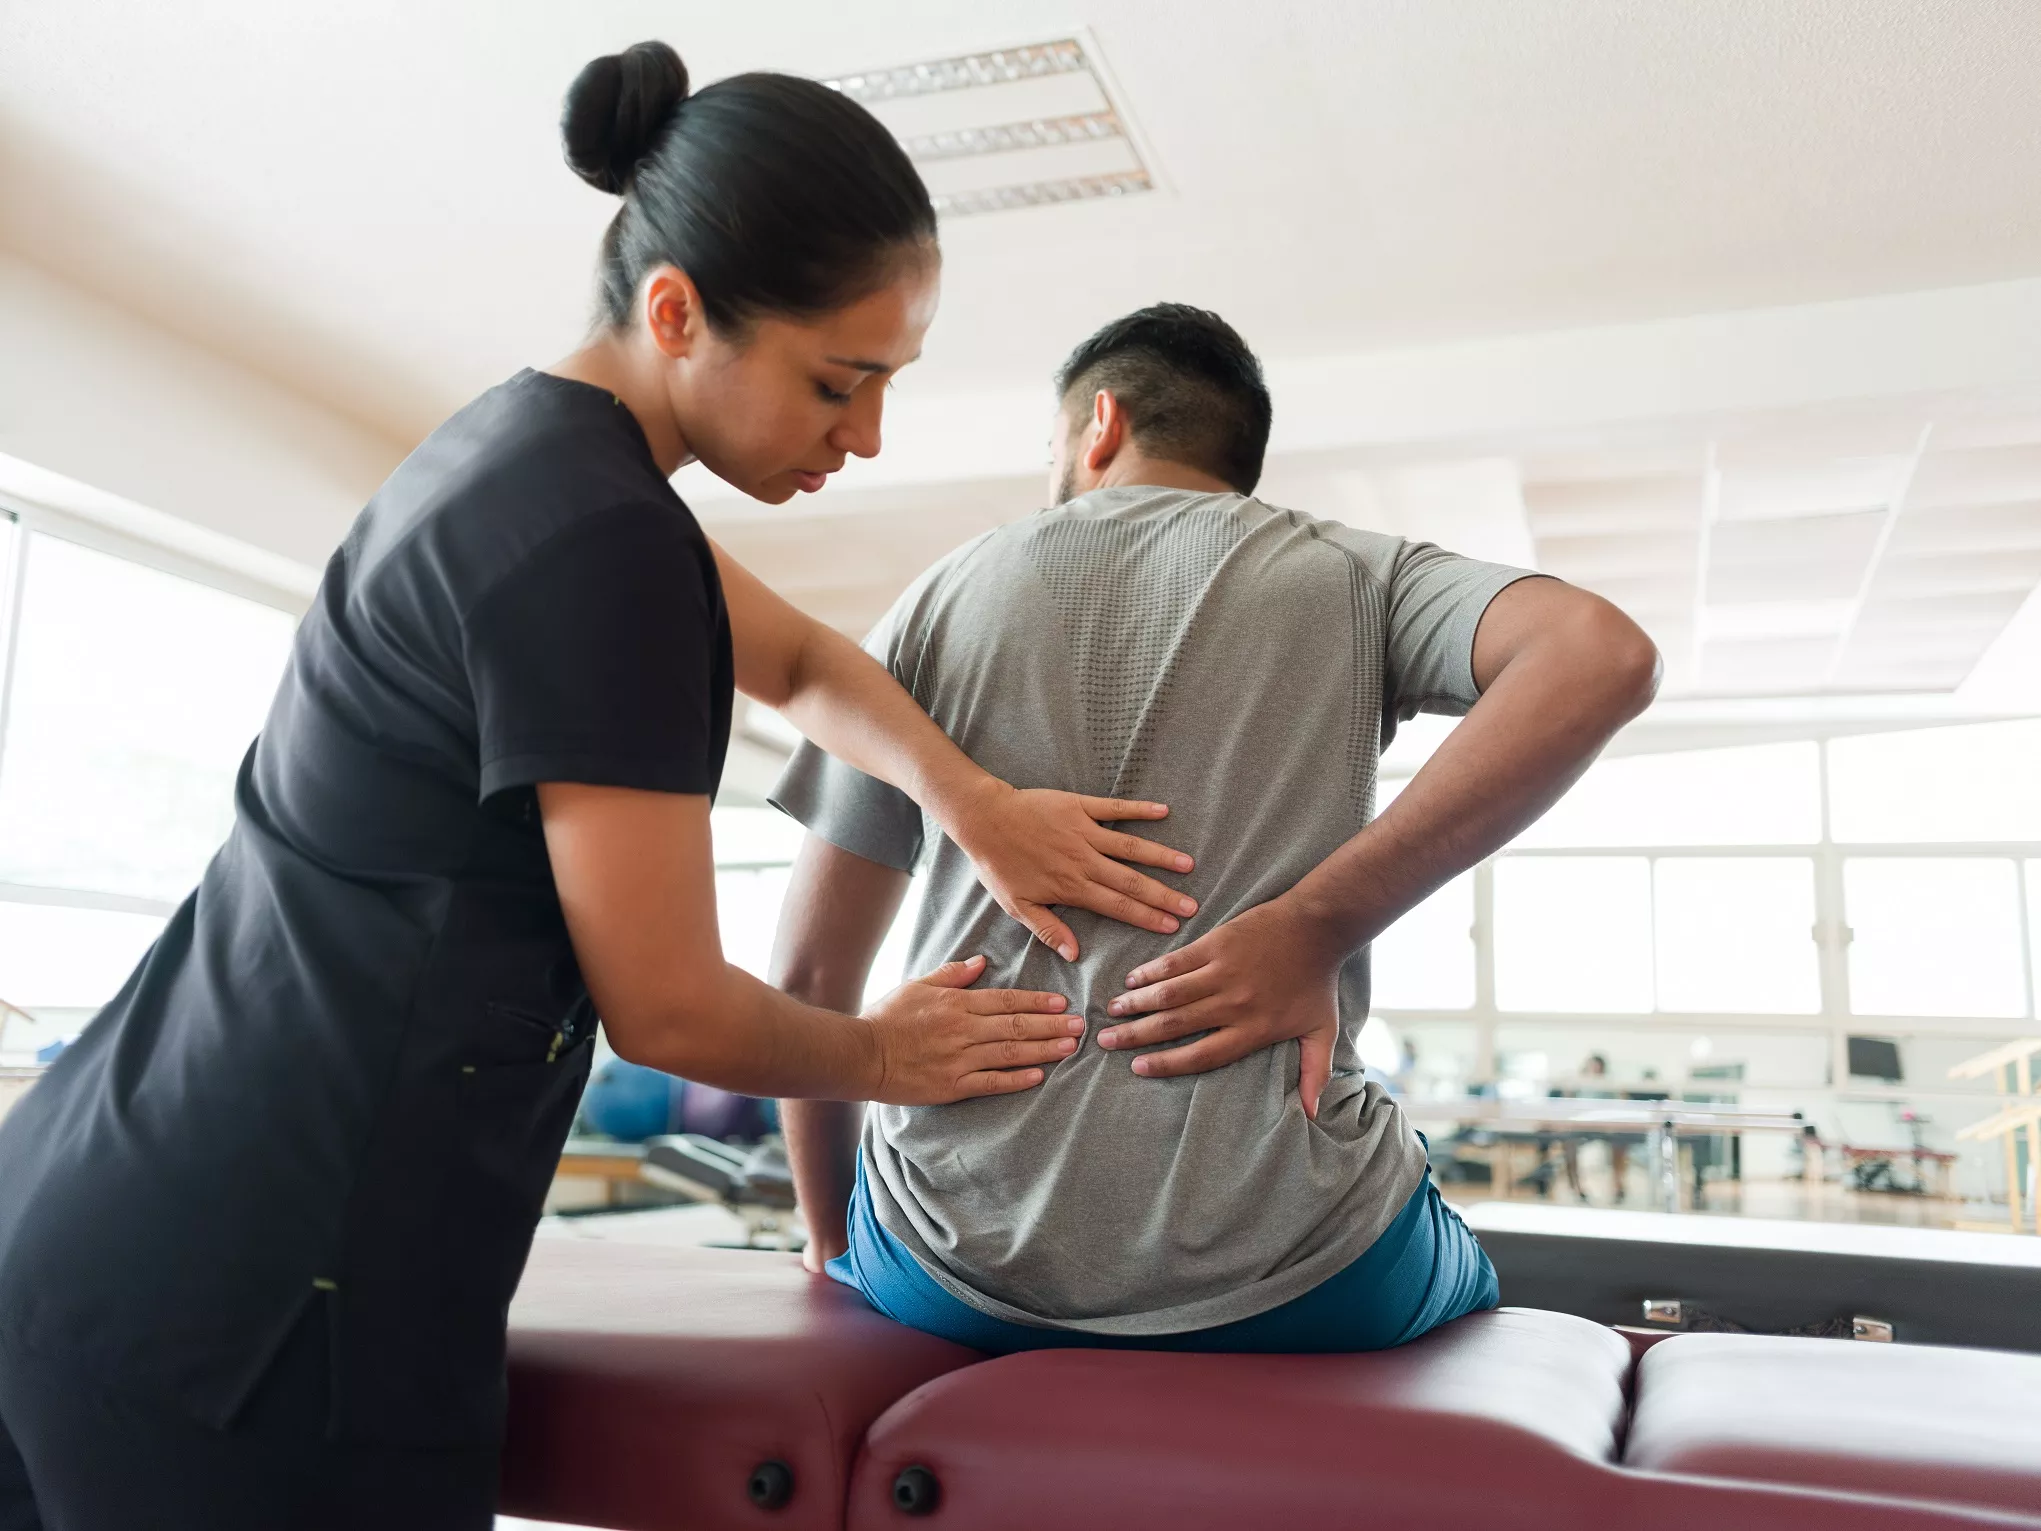 Physical therapist locating patient's back pain